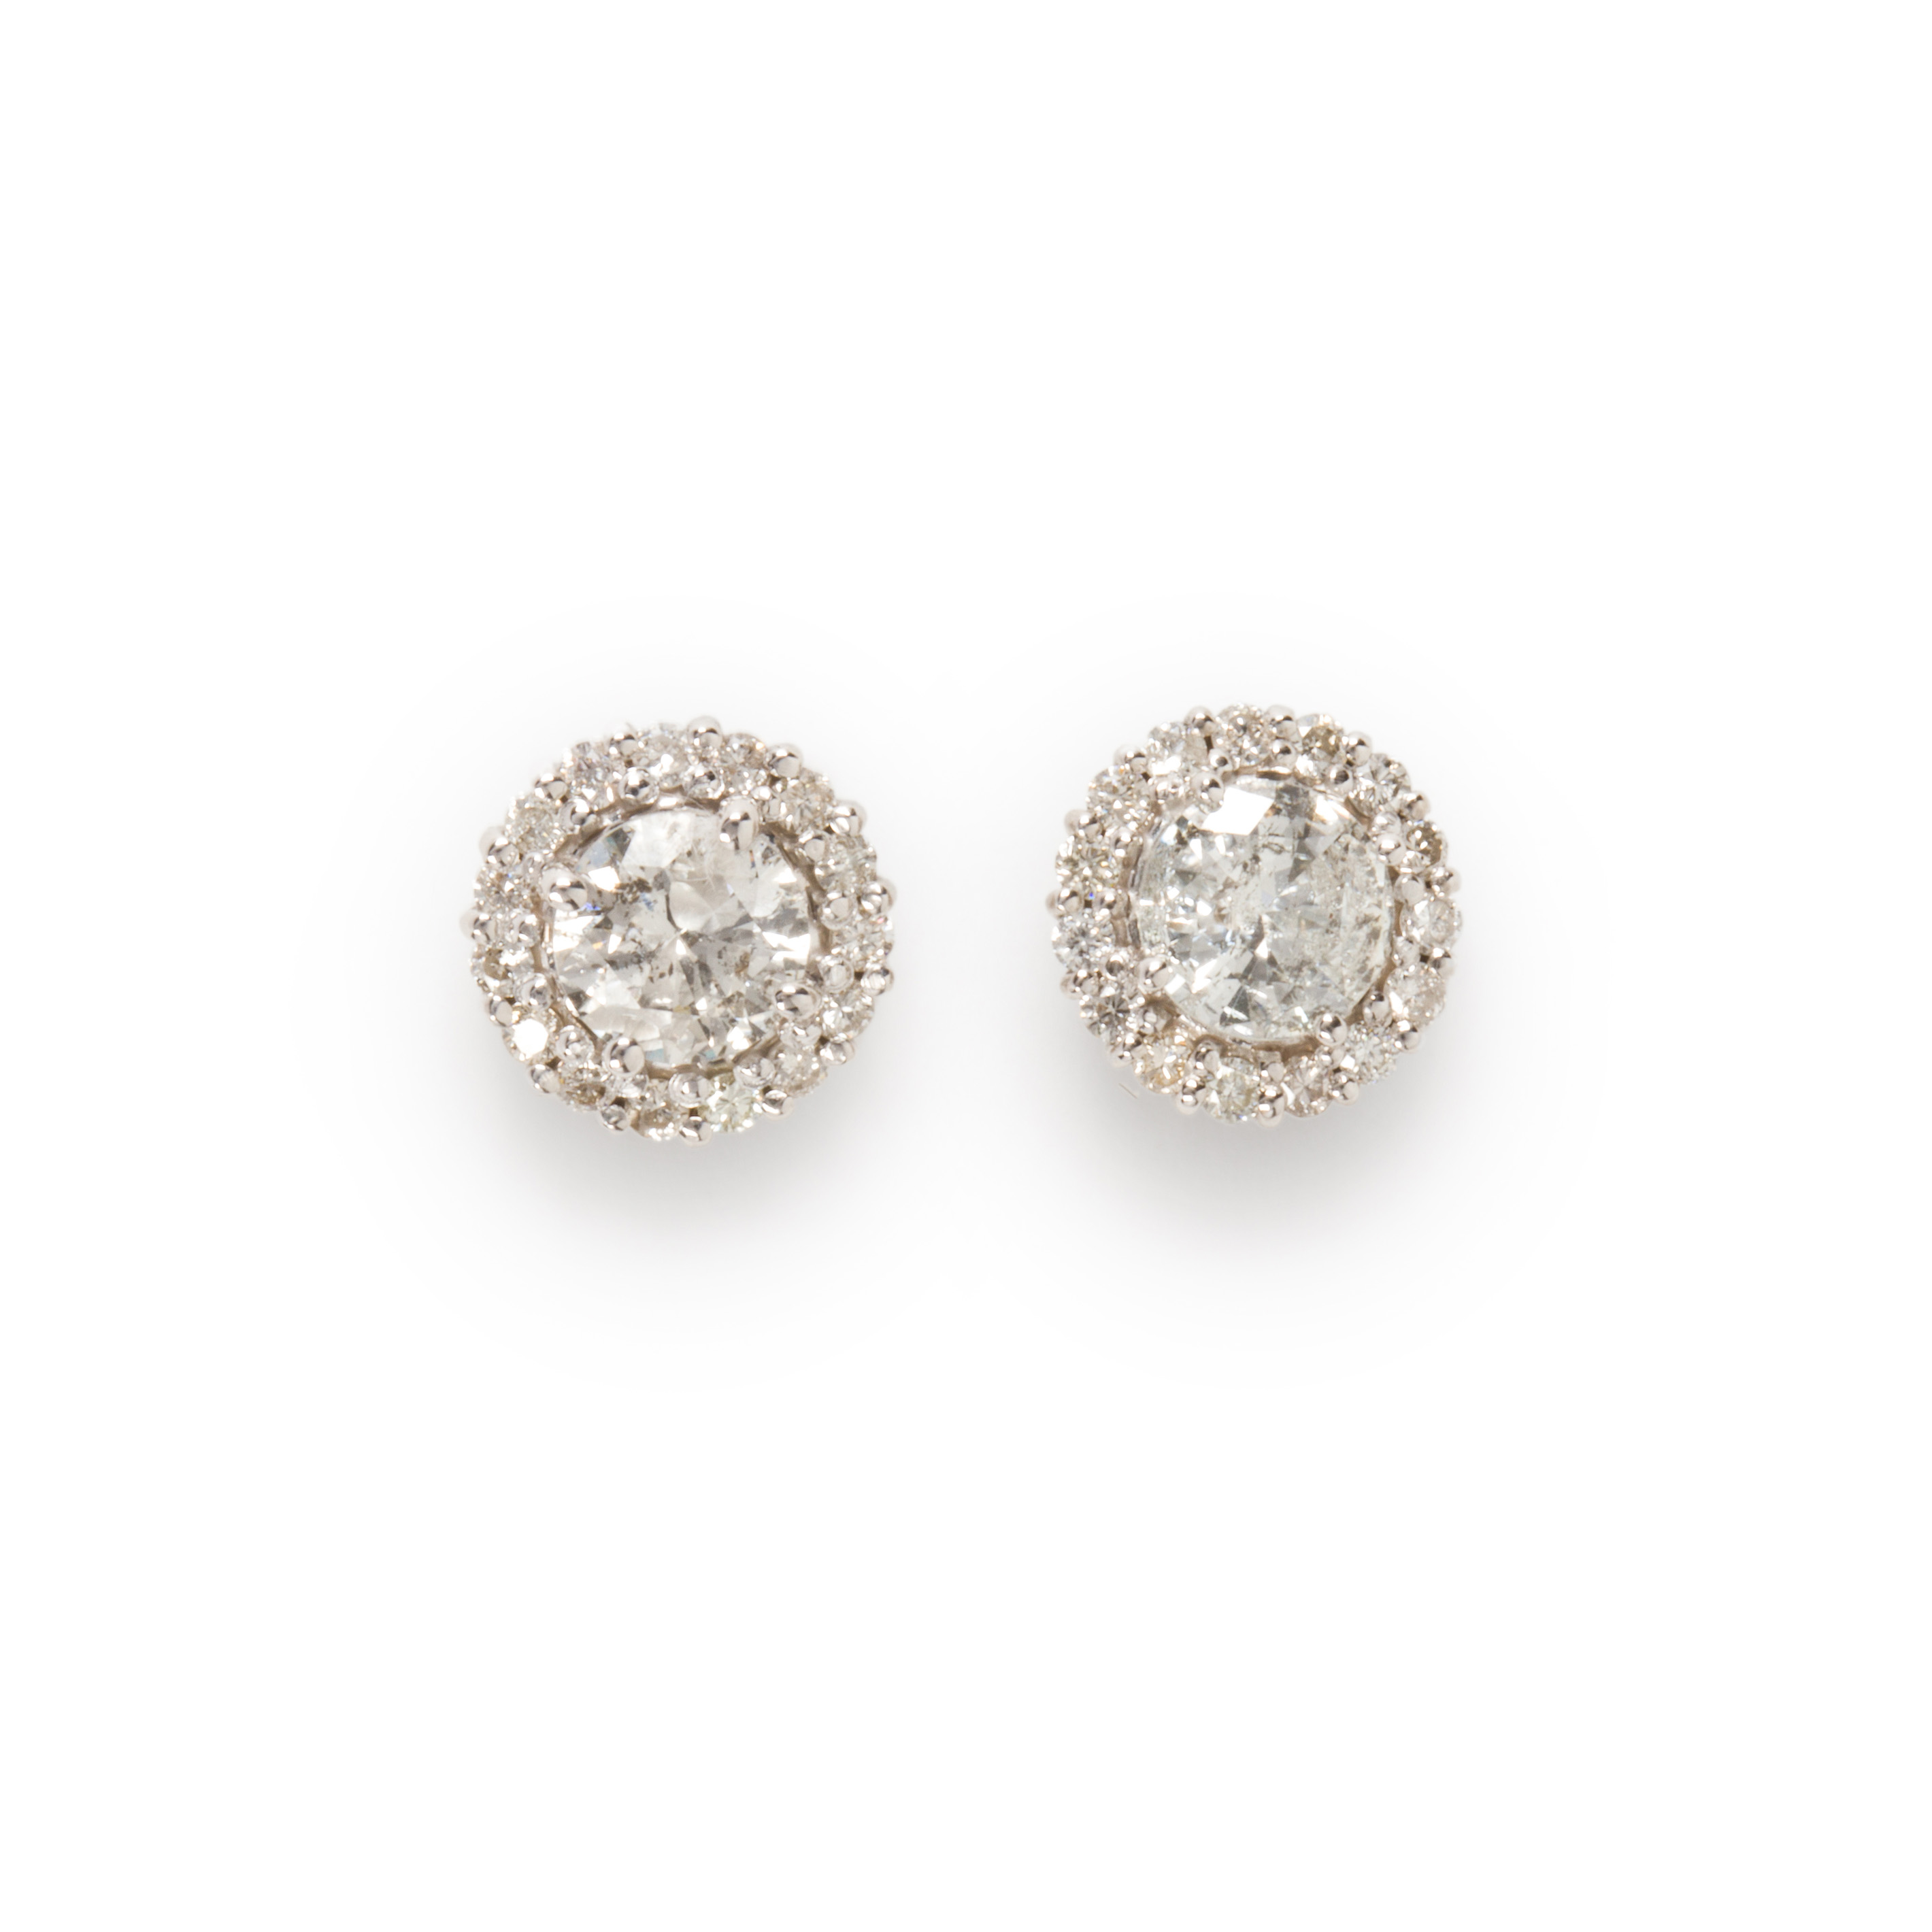 A PAIR OF DIAMOND AND EIGHTEEN 3a418f